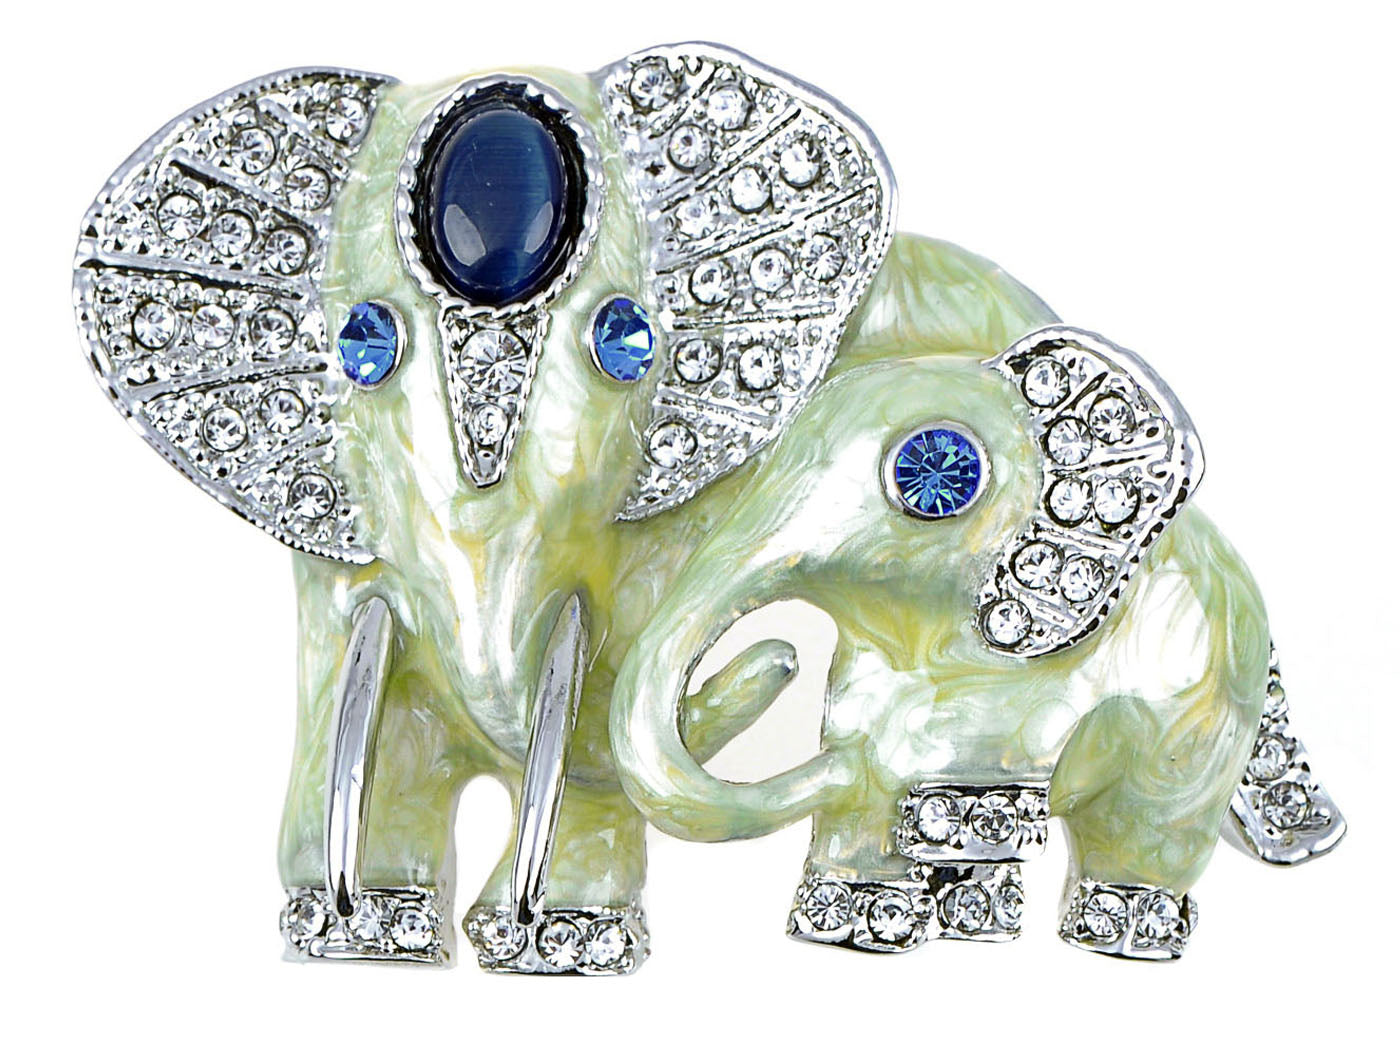 Elements Sapphire Eyed Pearlescent Paint Elephants Pin Brooch